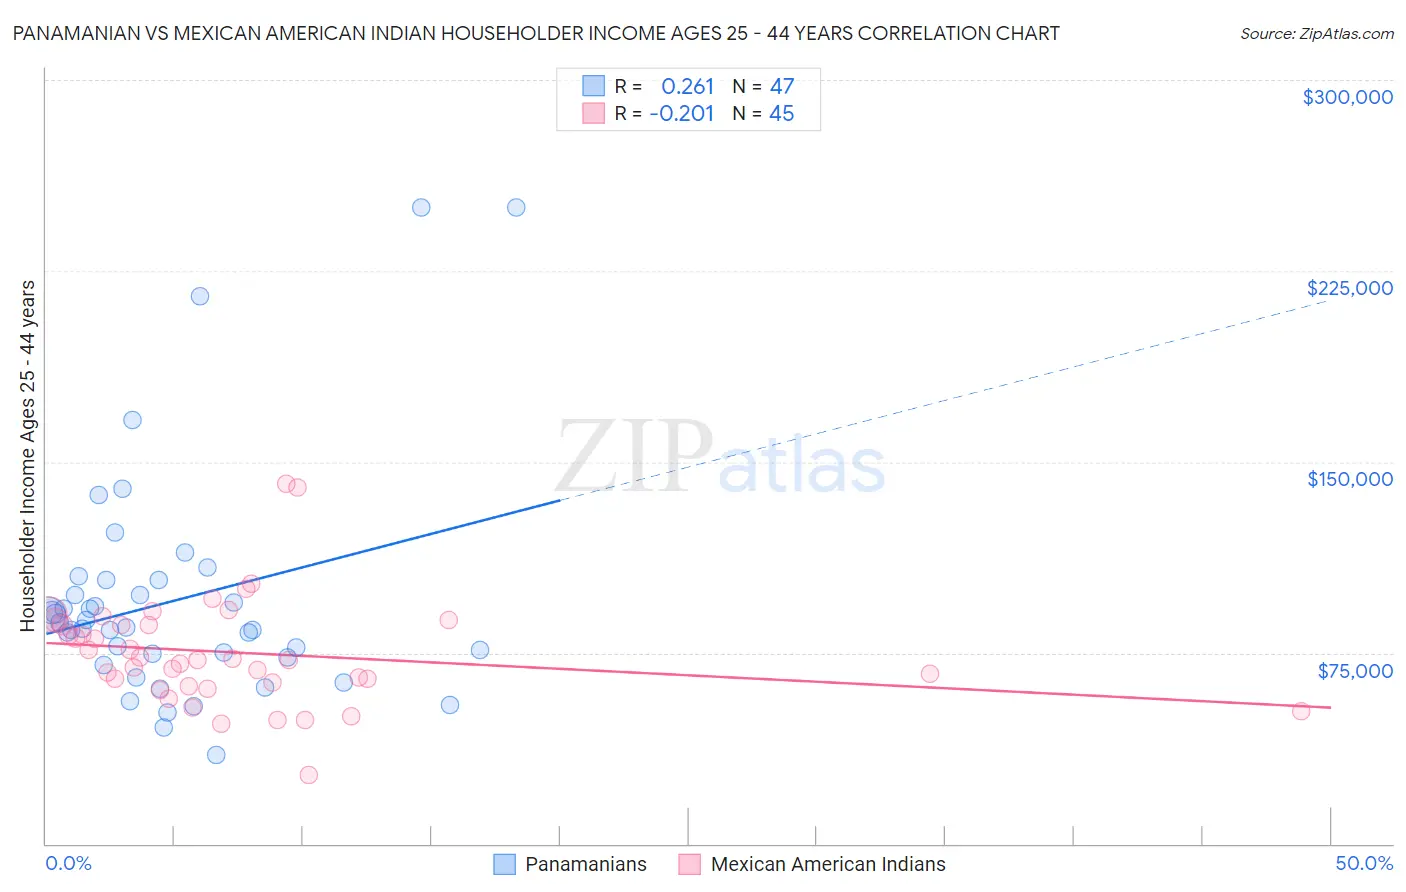 Panamanian vs Mexican American Indian Householder Income Ages 25 - 44 years